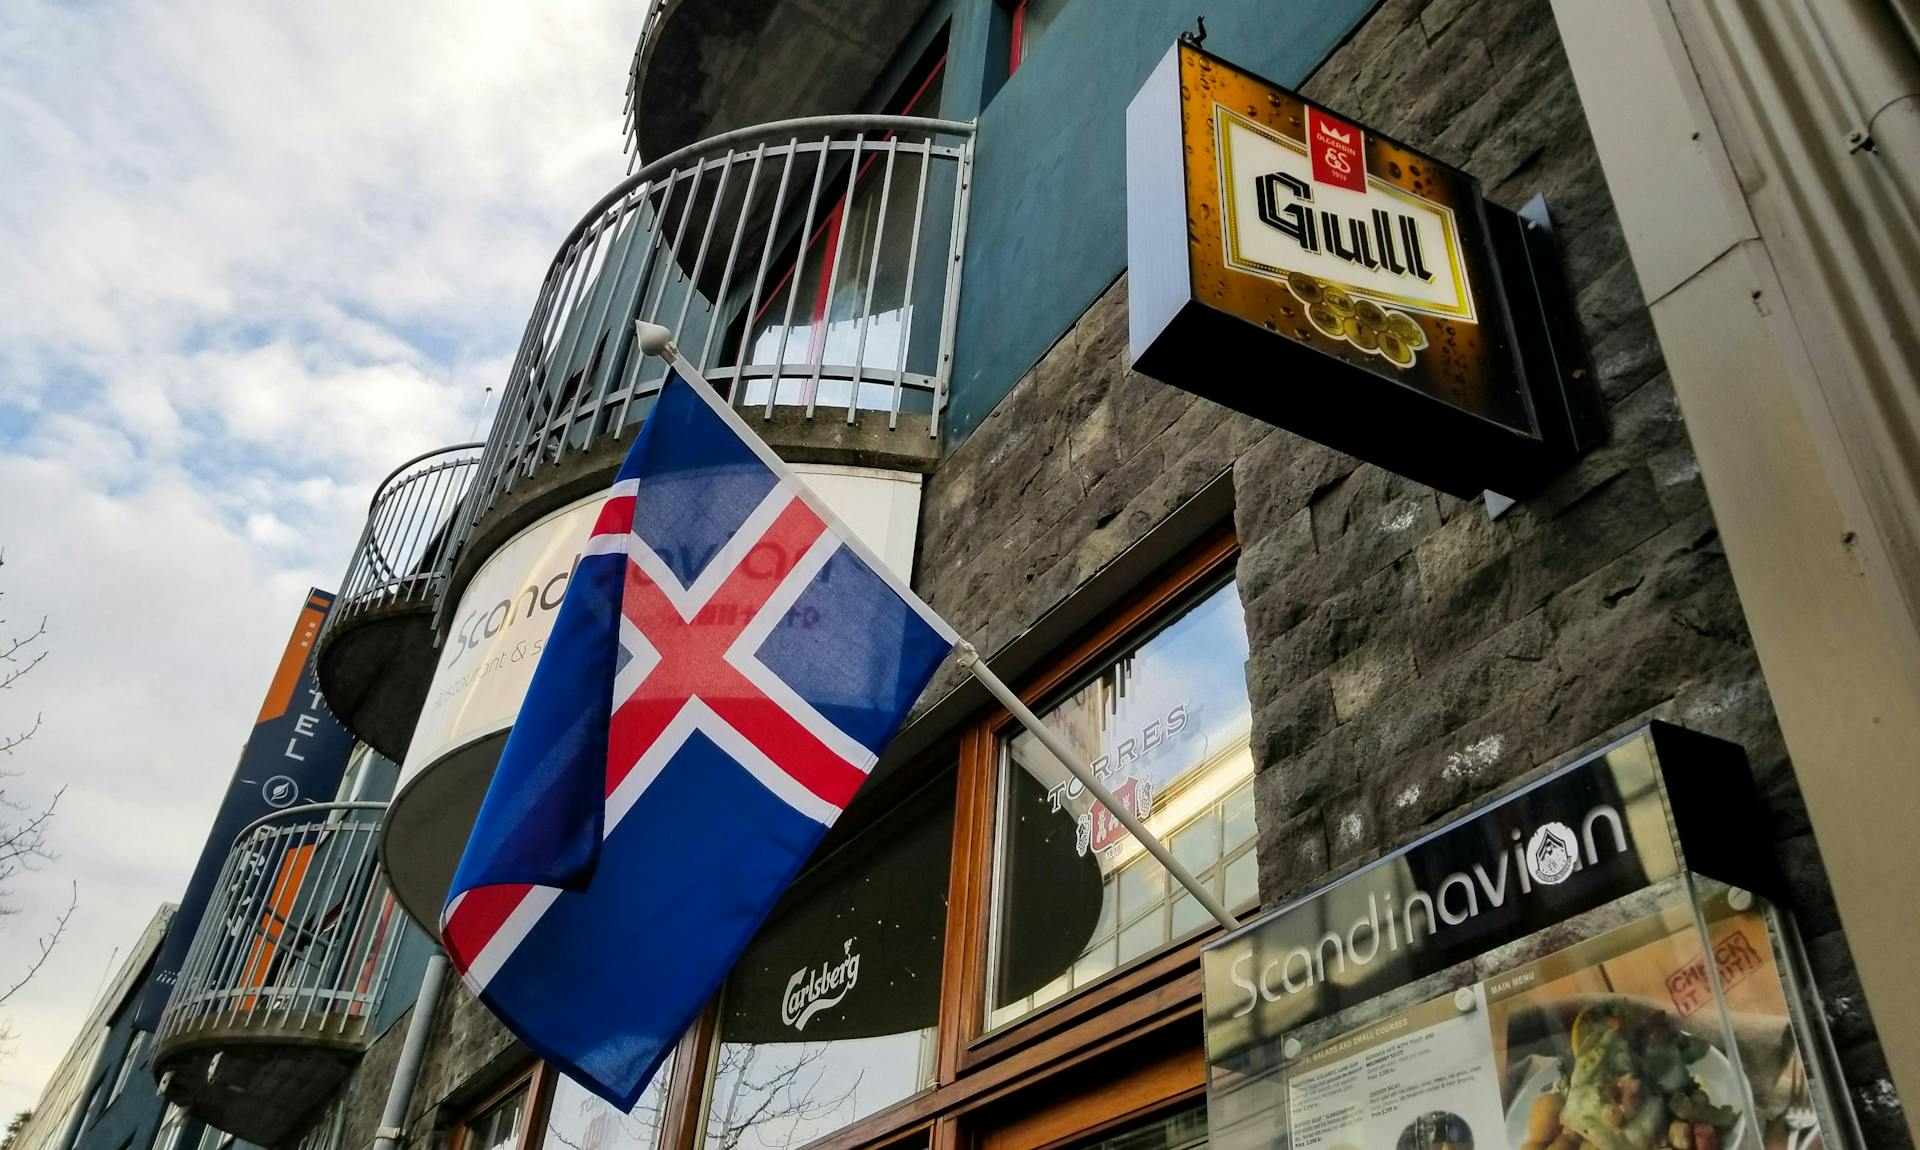 Icelandic flag and a pub sign for Gull